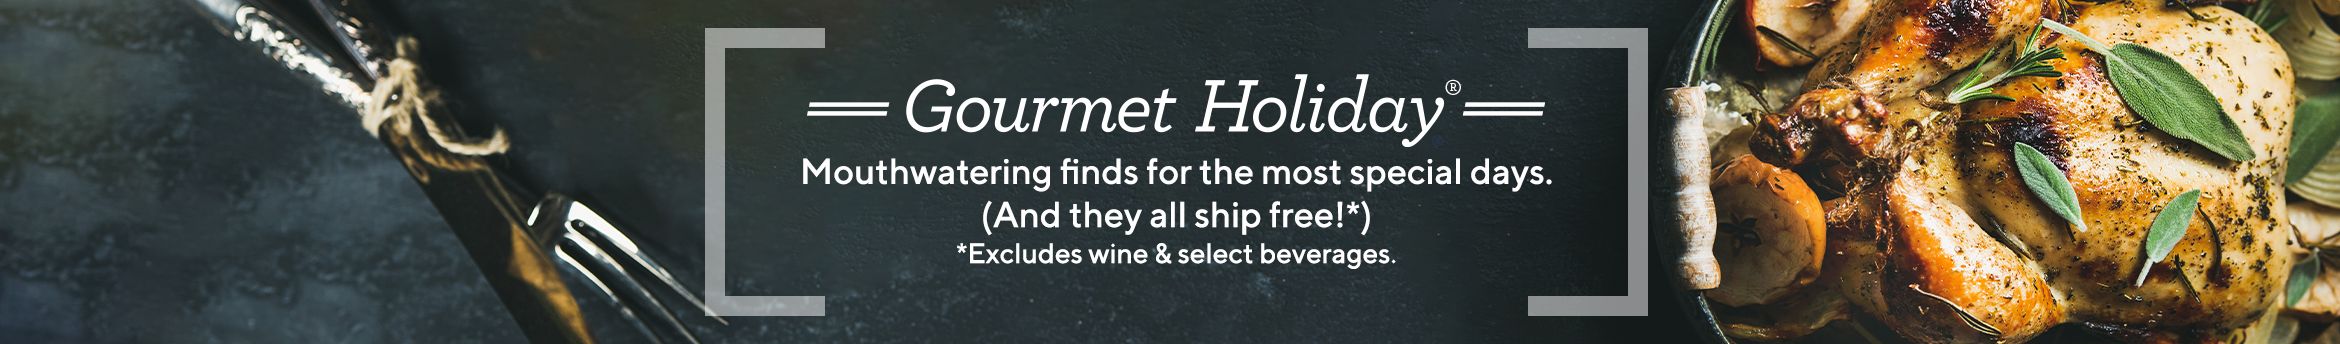 Gourmet Holiday. Mouthwatering finds for the most special days. (And they all ship free!*)  *Excludes wine.